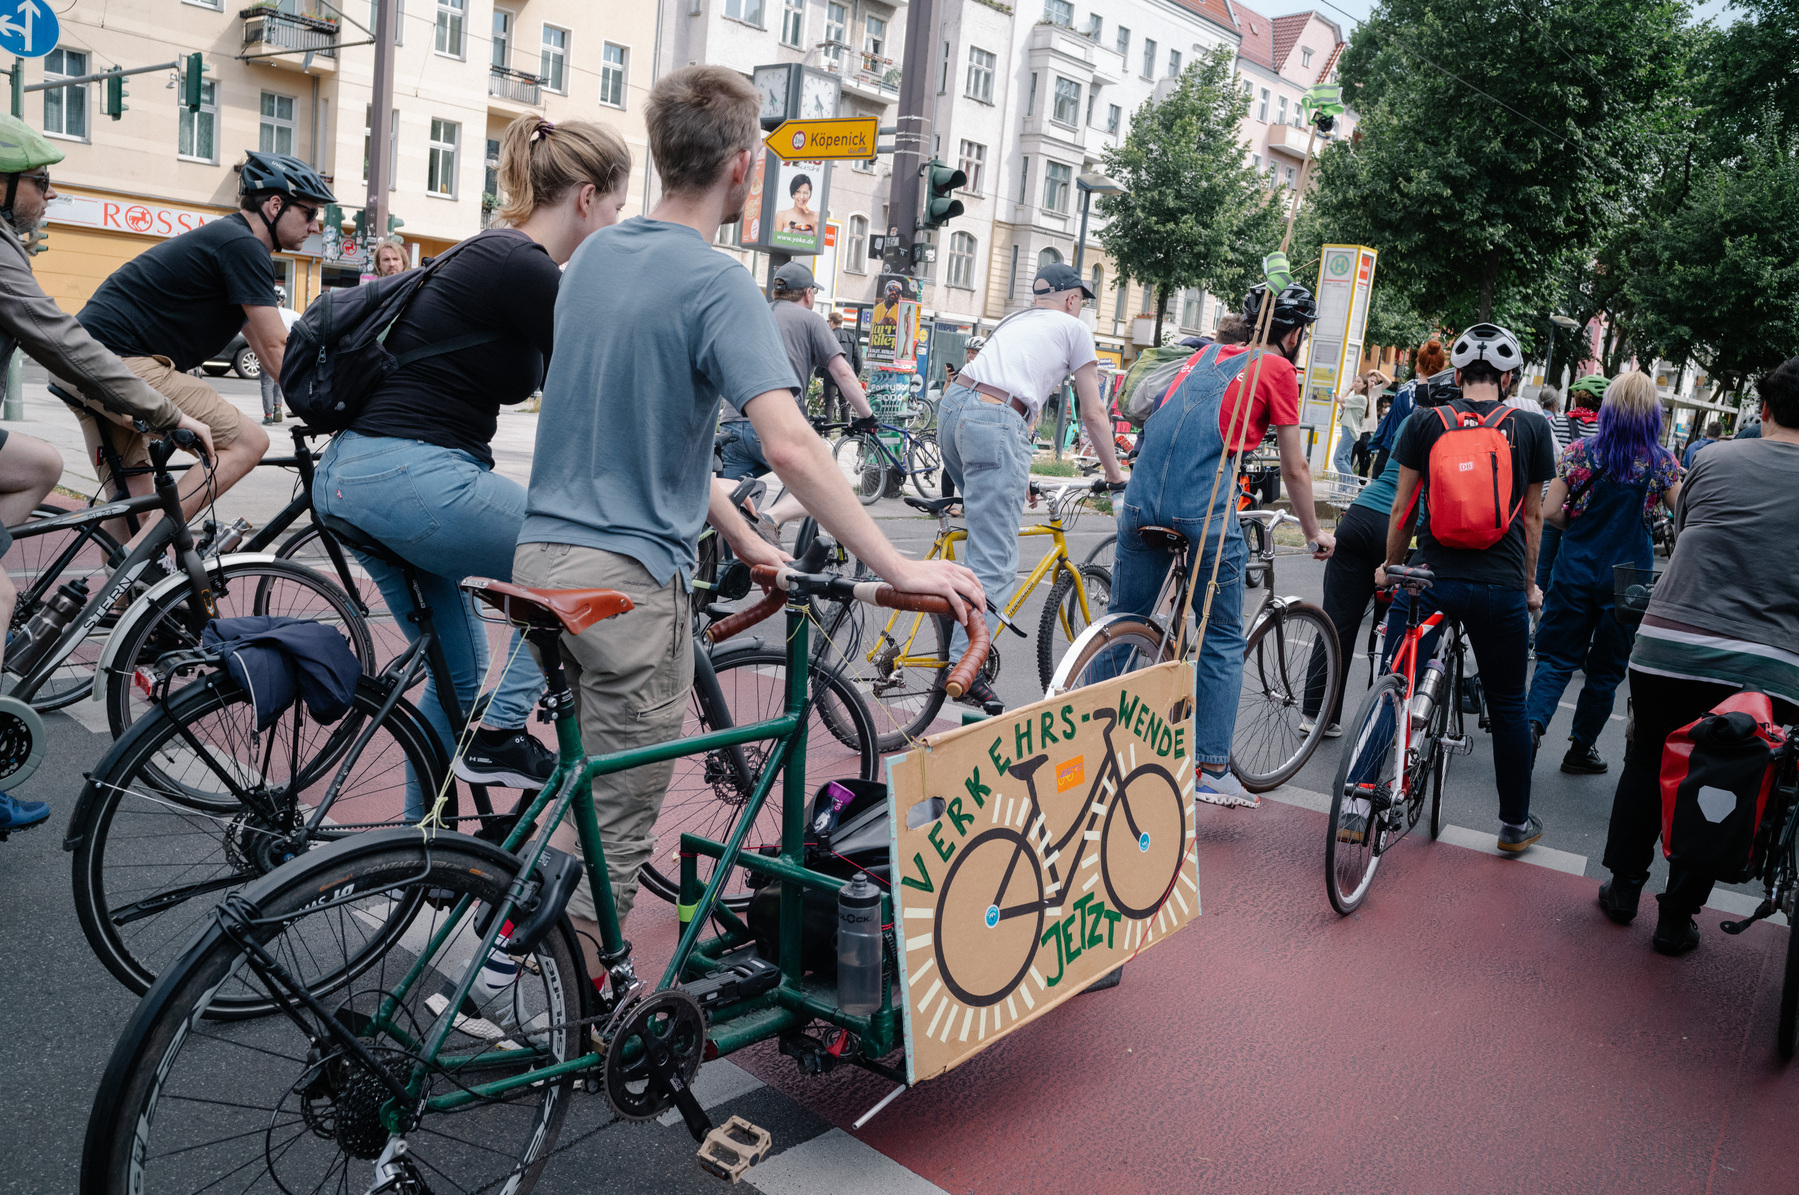 A snapshot of a bike protest, the focal point is a sign that reads “Verkehrswende Jetzt”